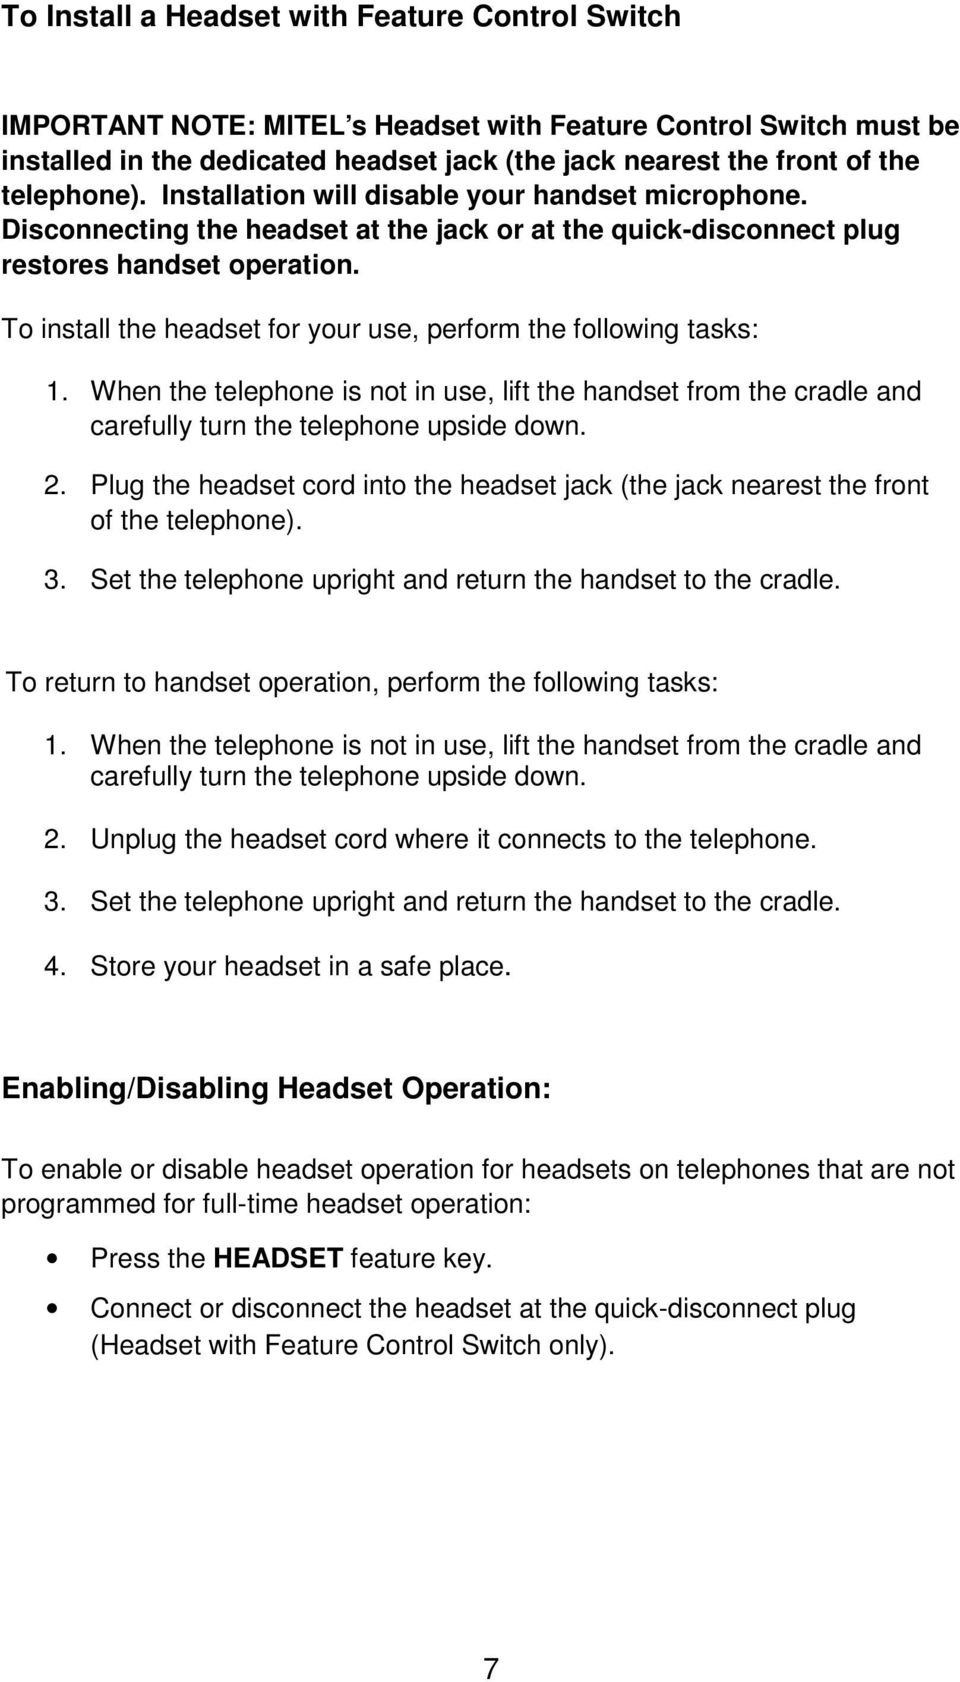 To install the headset for your use, perform the following tasks: 1. When the telephone is not in use, lift the handset from the cradle and carefully turn the telephone upside down. 2.